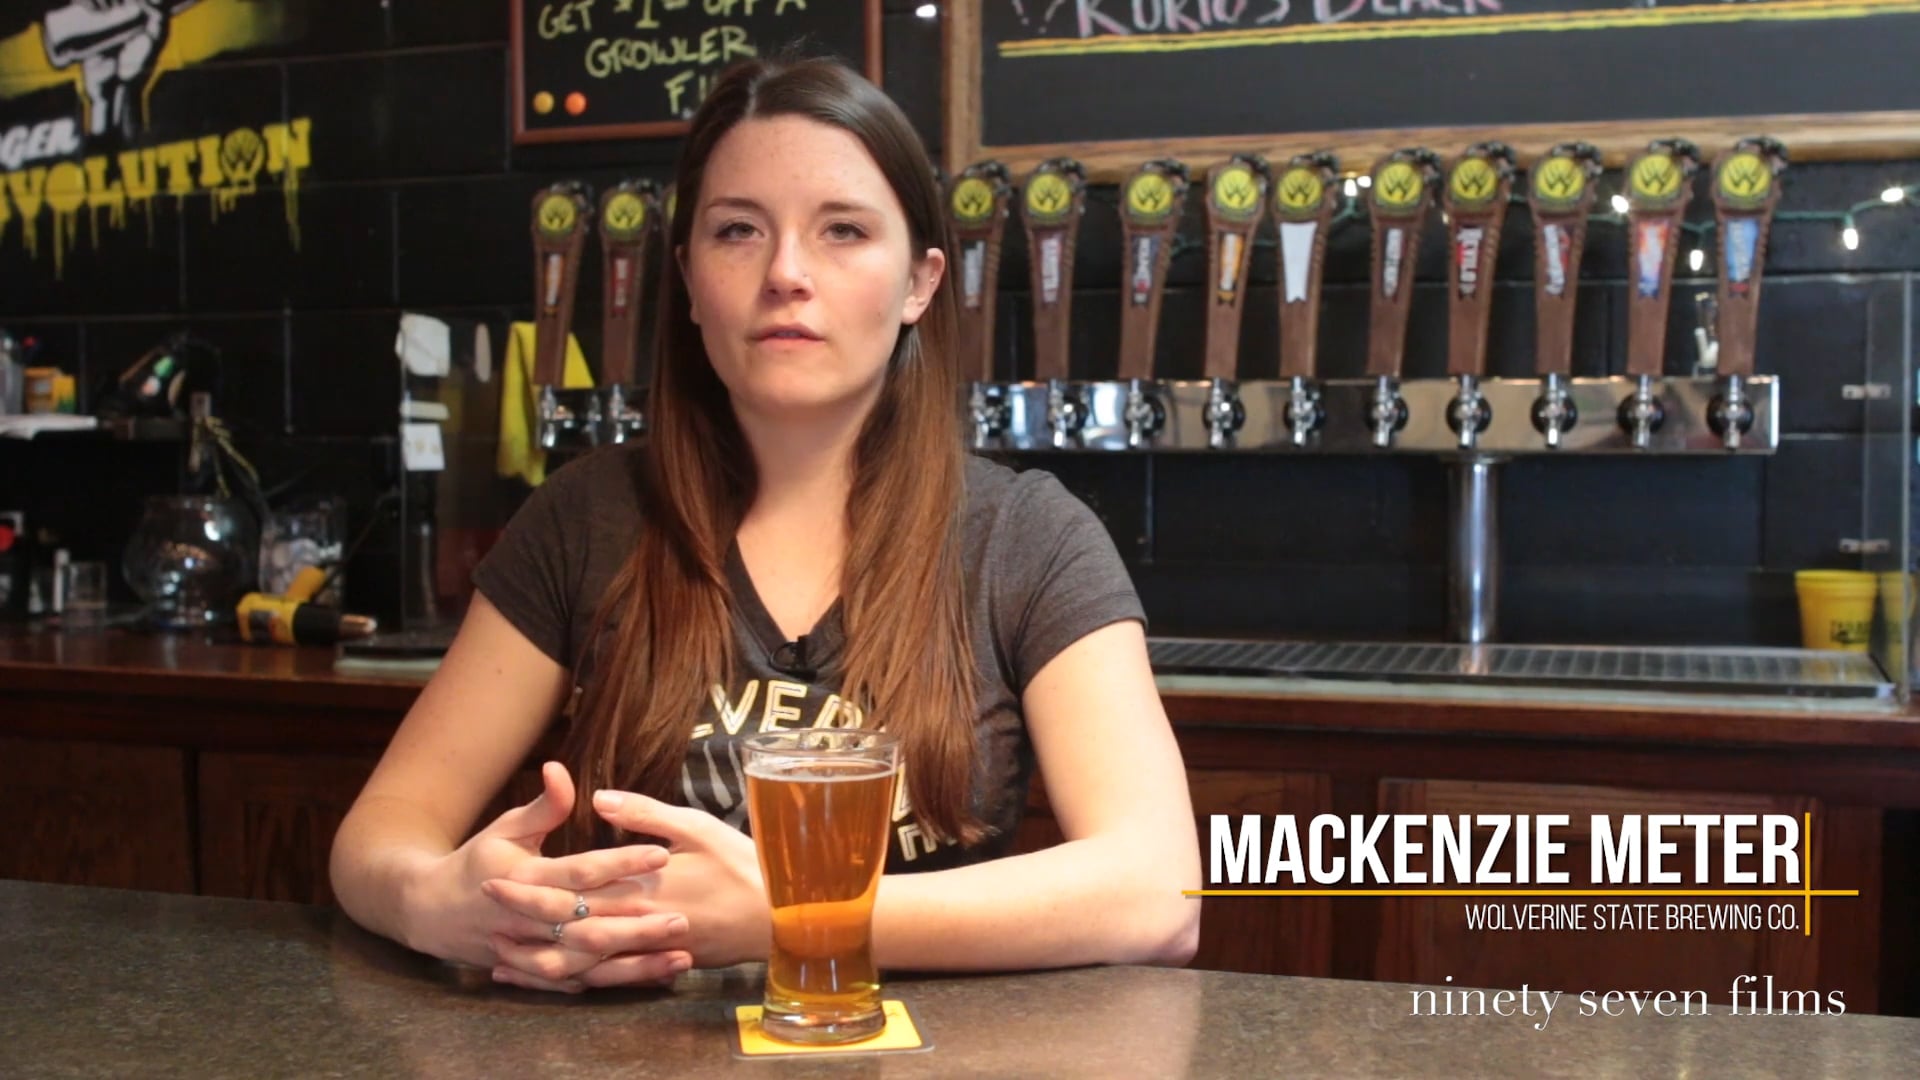 Wolverine State Brewing Co. | Business Film Testimonial